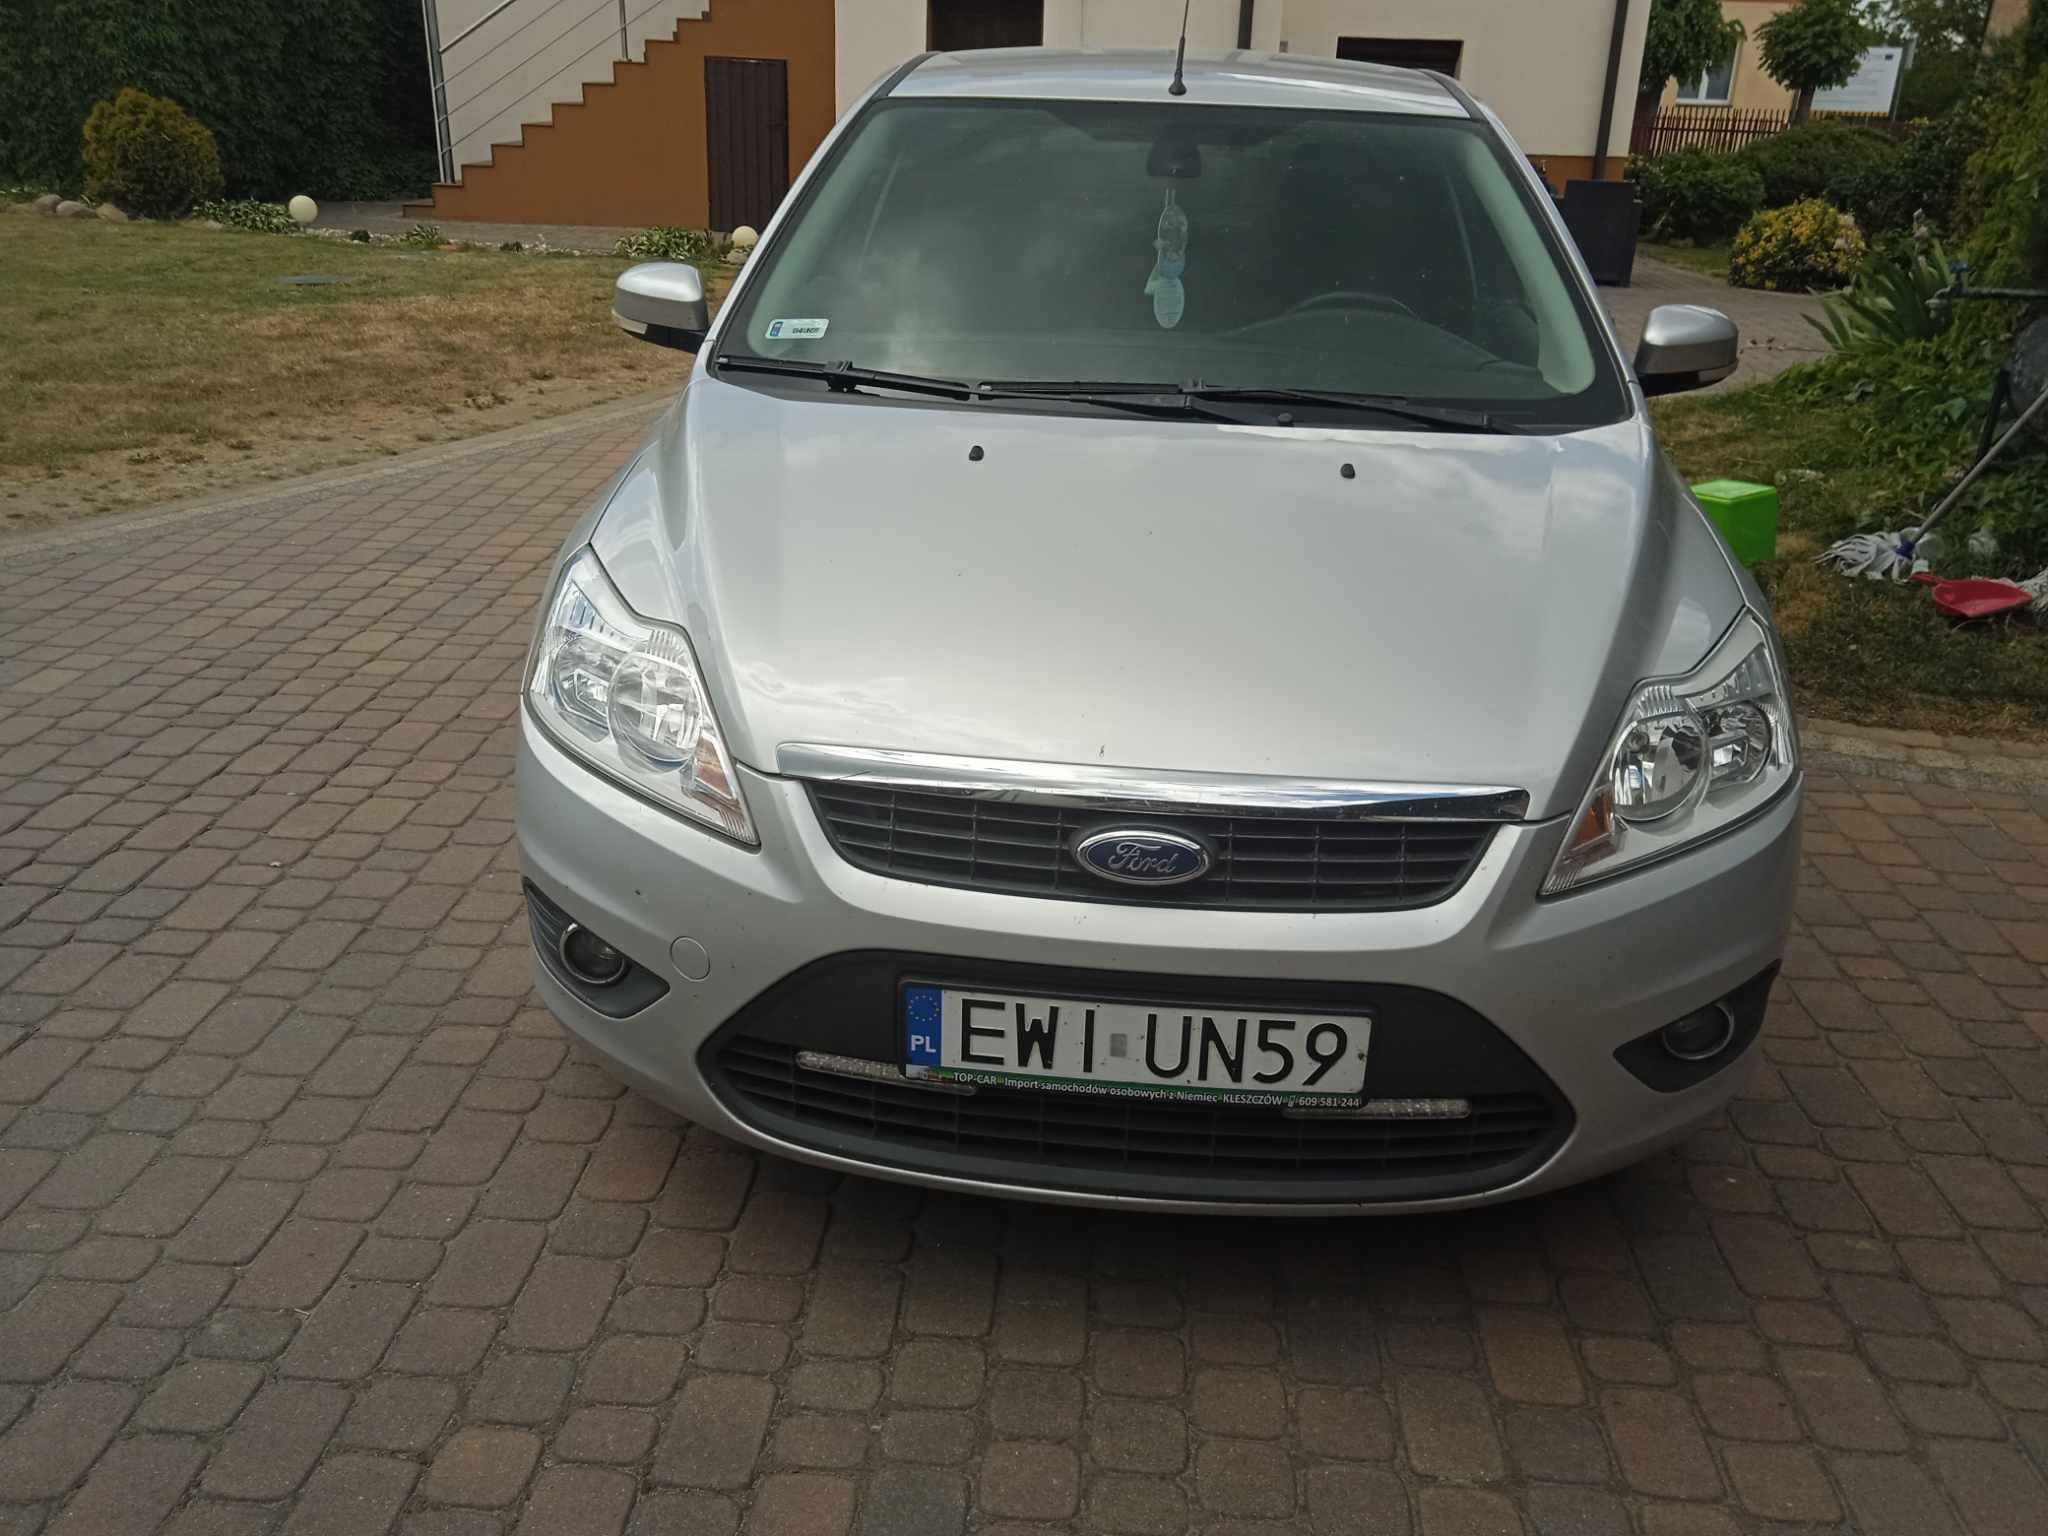 Ford Focus mk2 benzyna 1.6